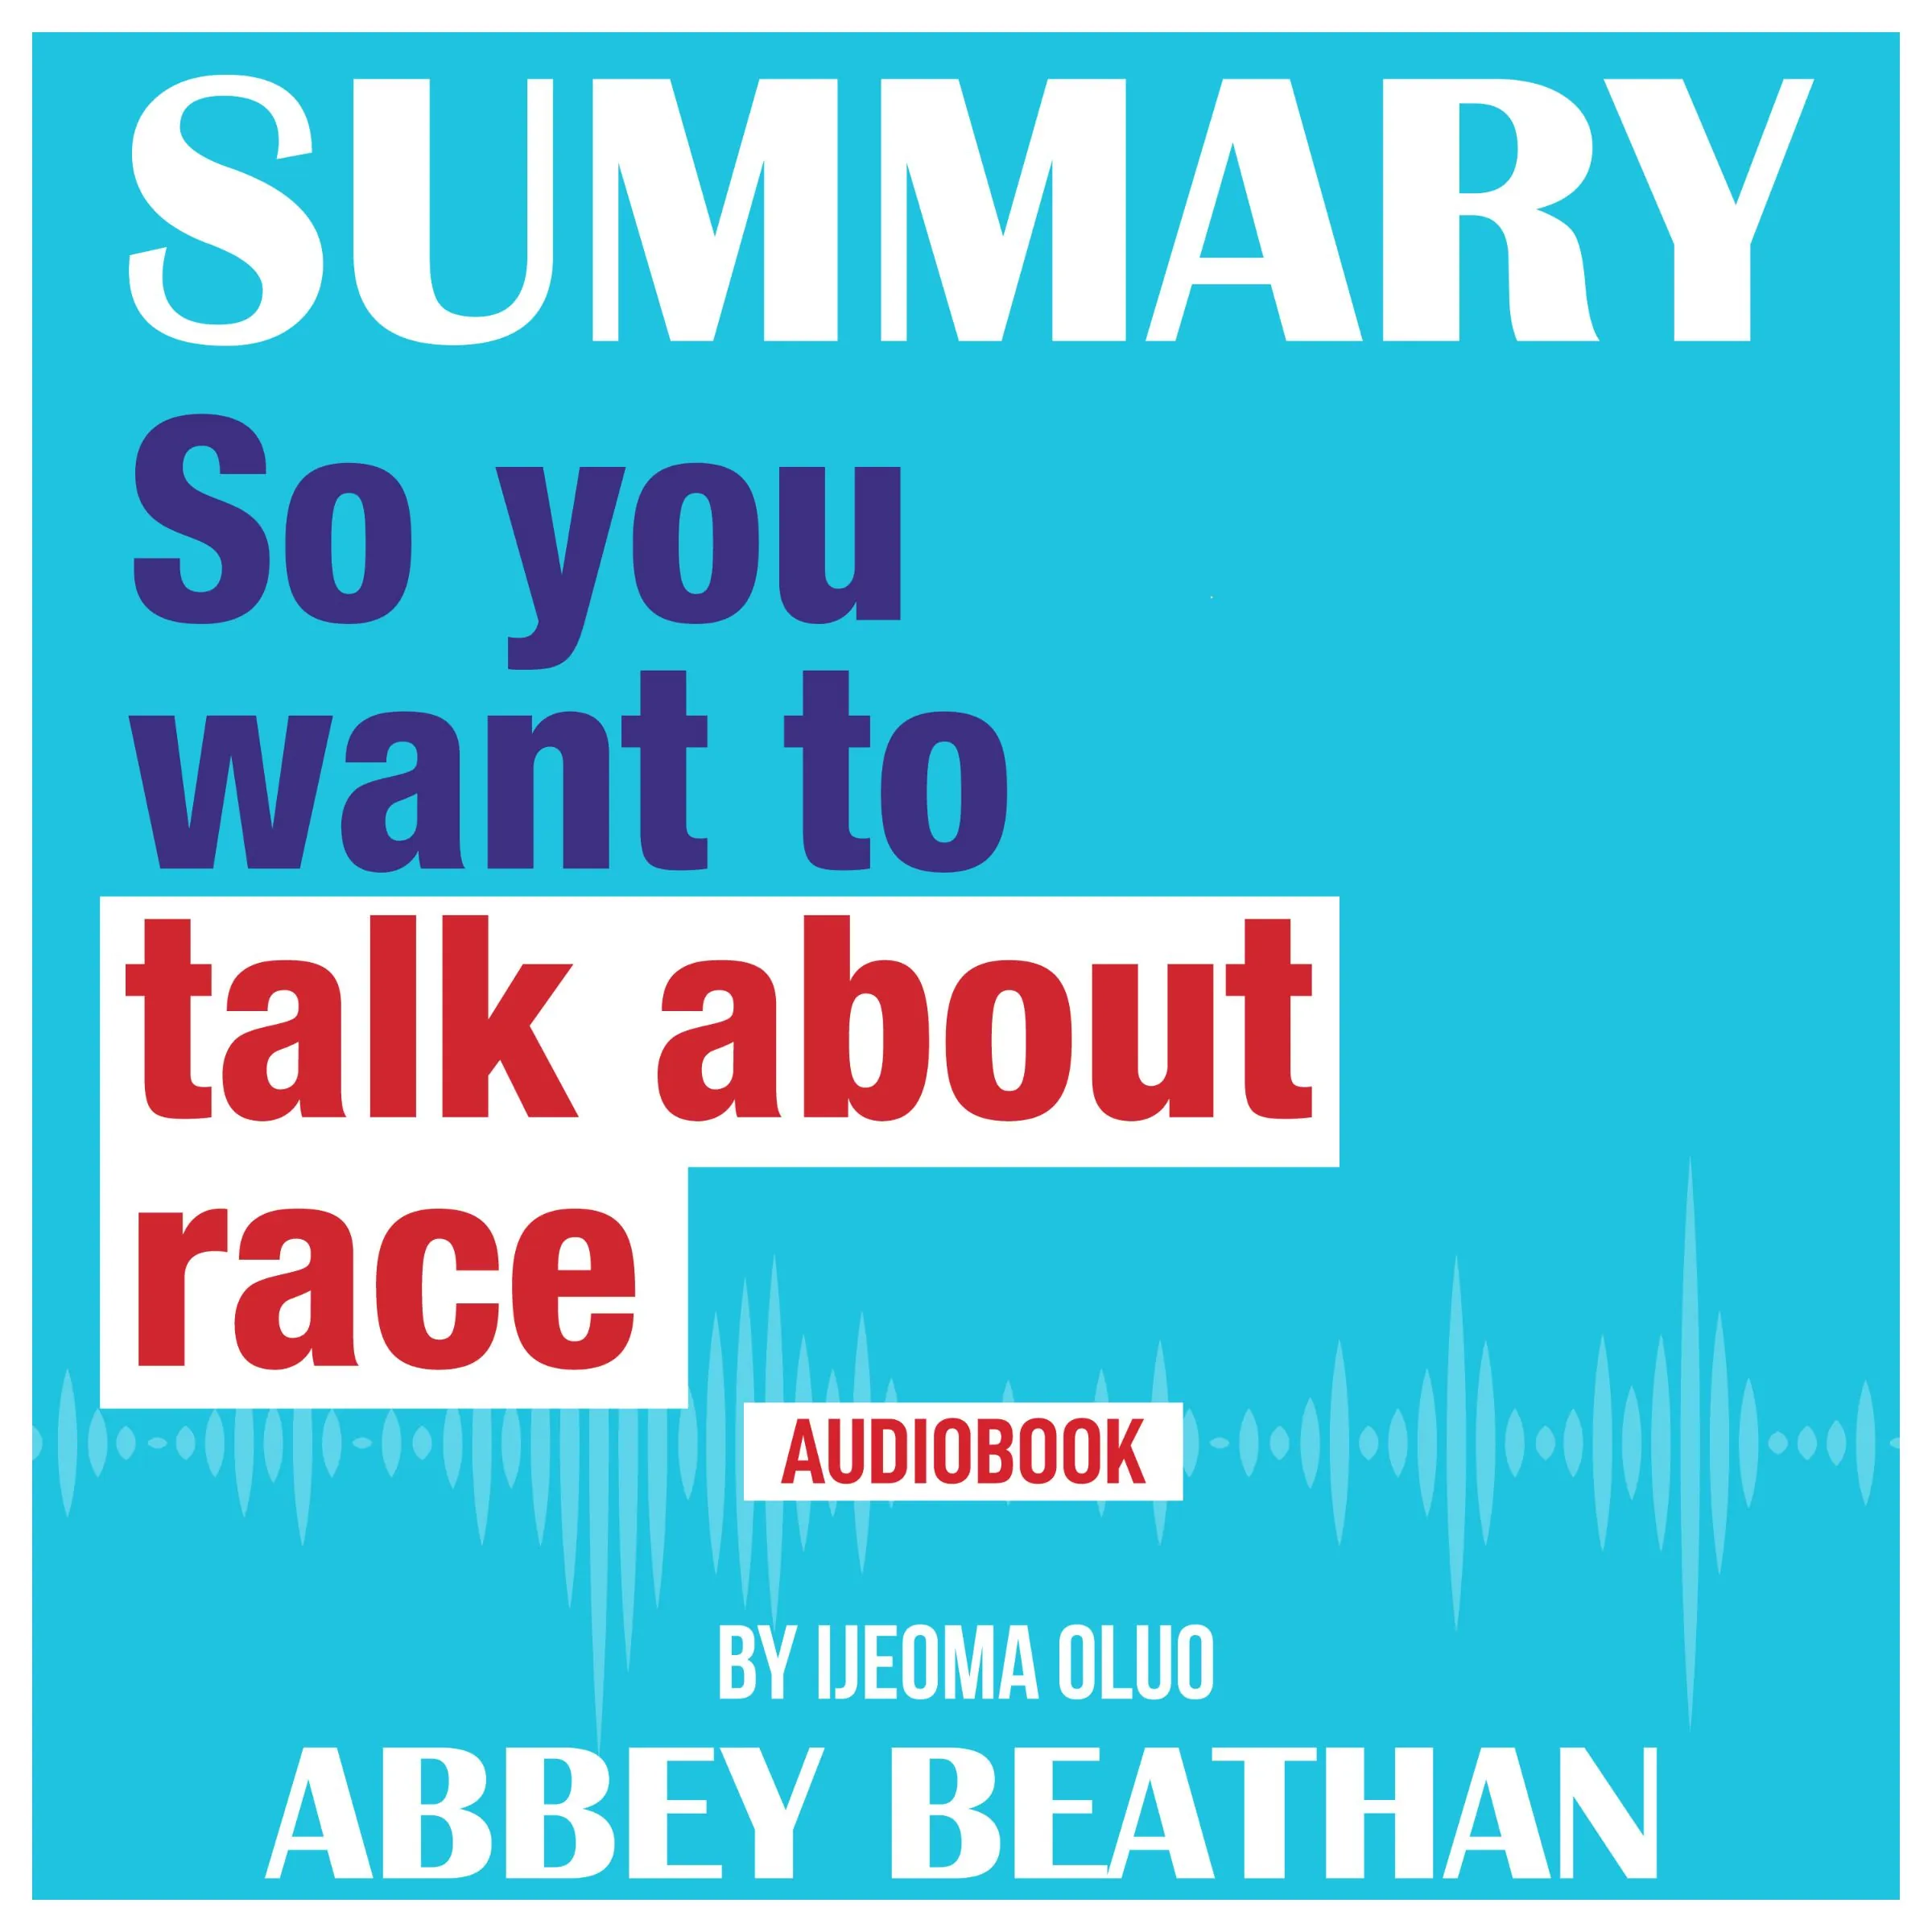 Summary of So You Want to Talk About Race by Ijeoma Oluo Audiobook by Abbey Beathan